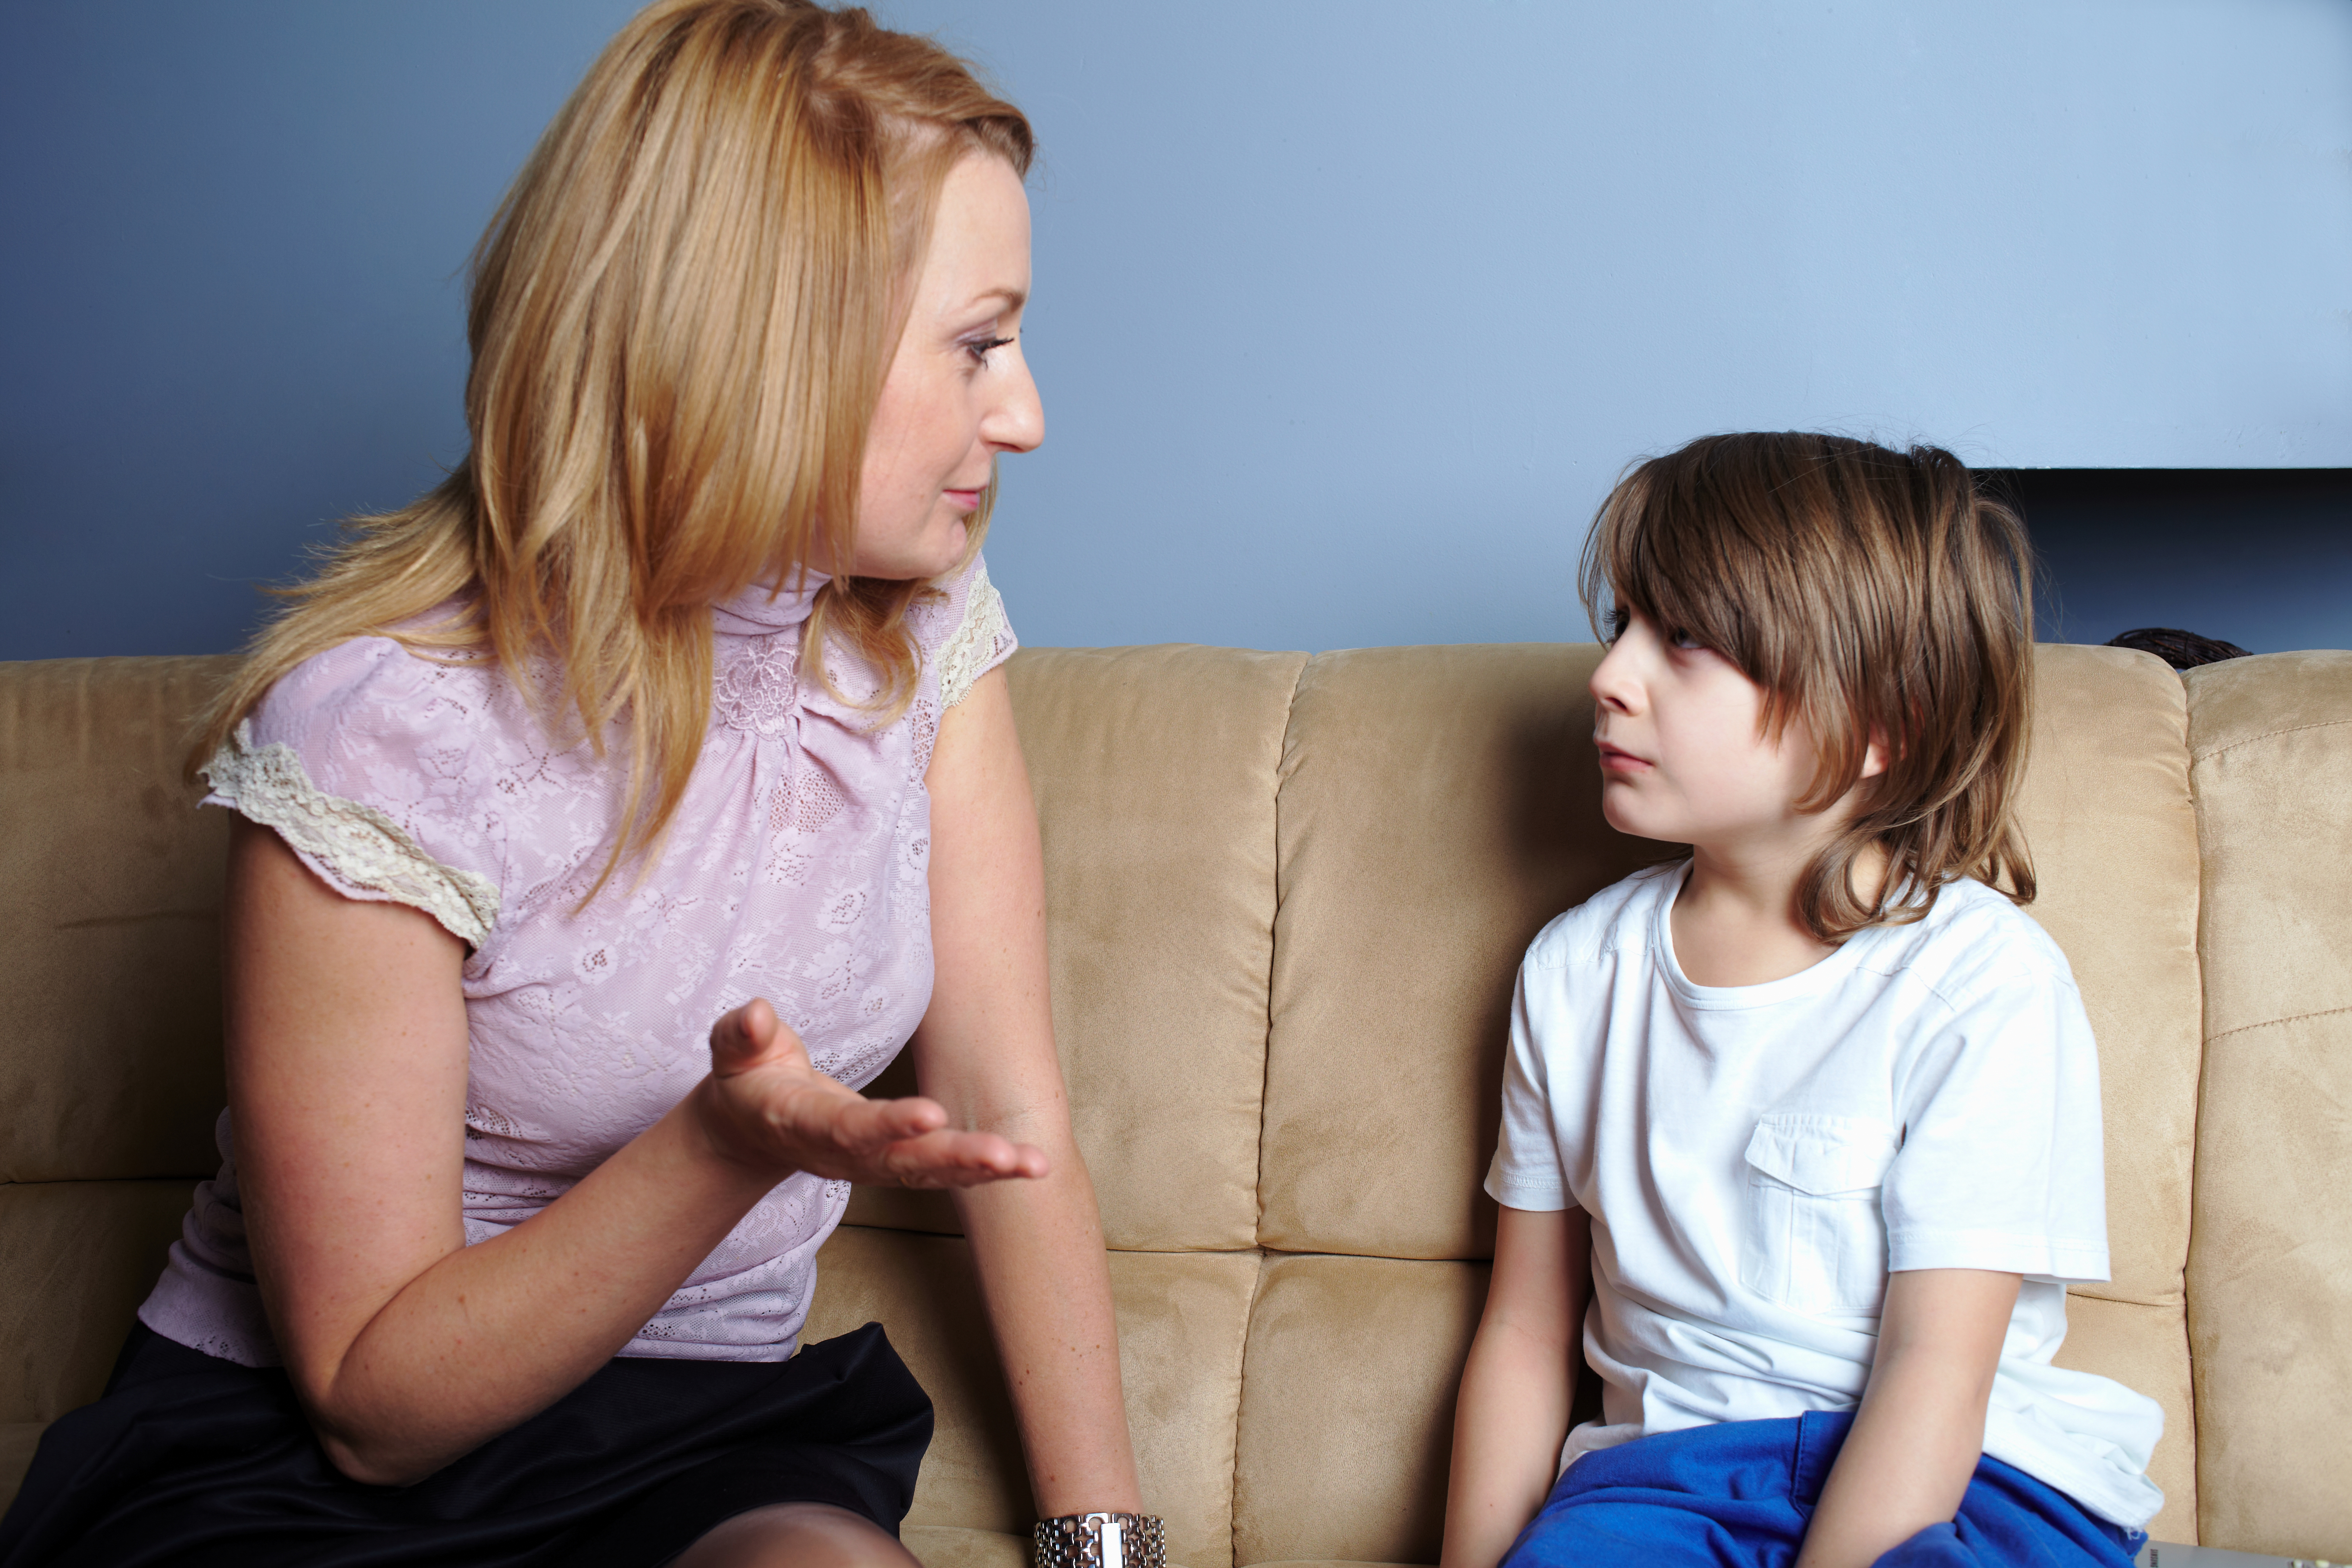 A parents speaking to her sad child | Source: Shutterstock